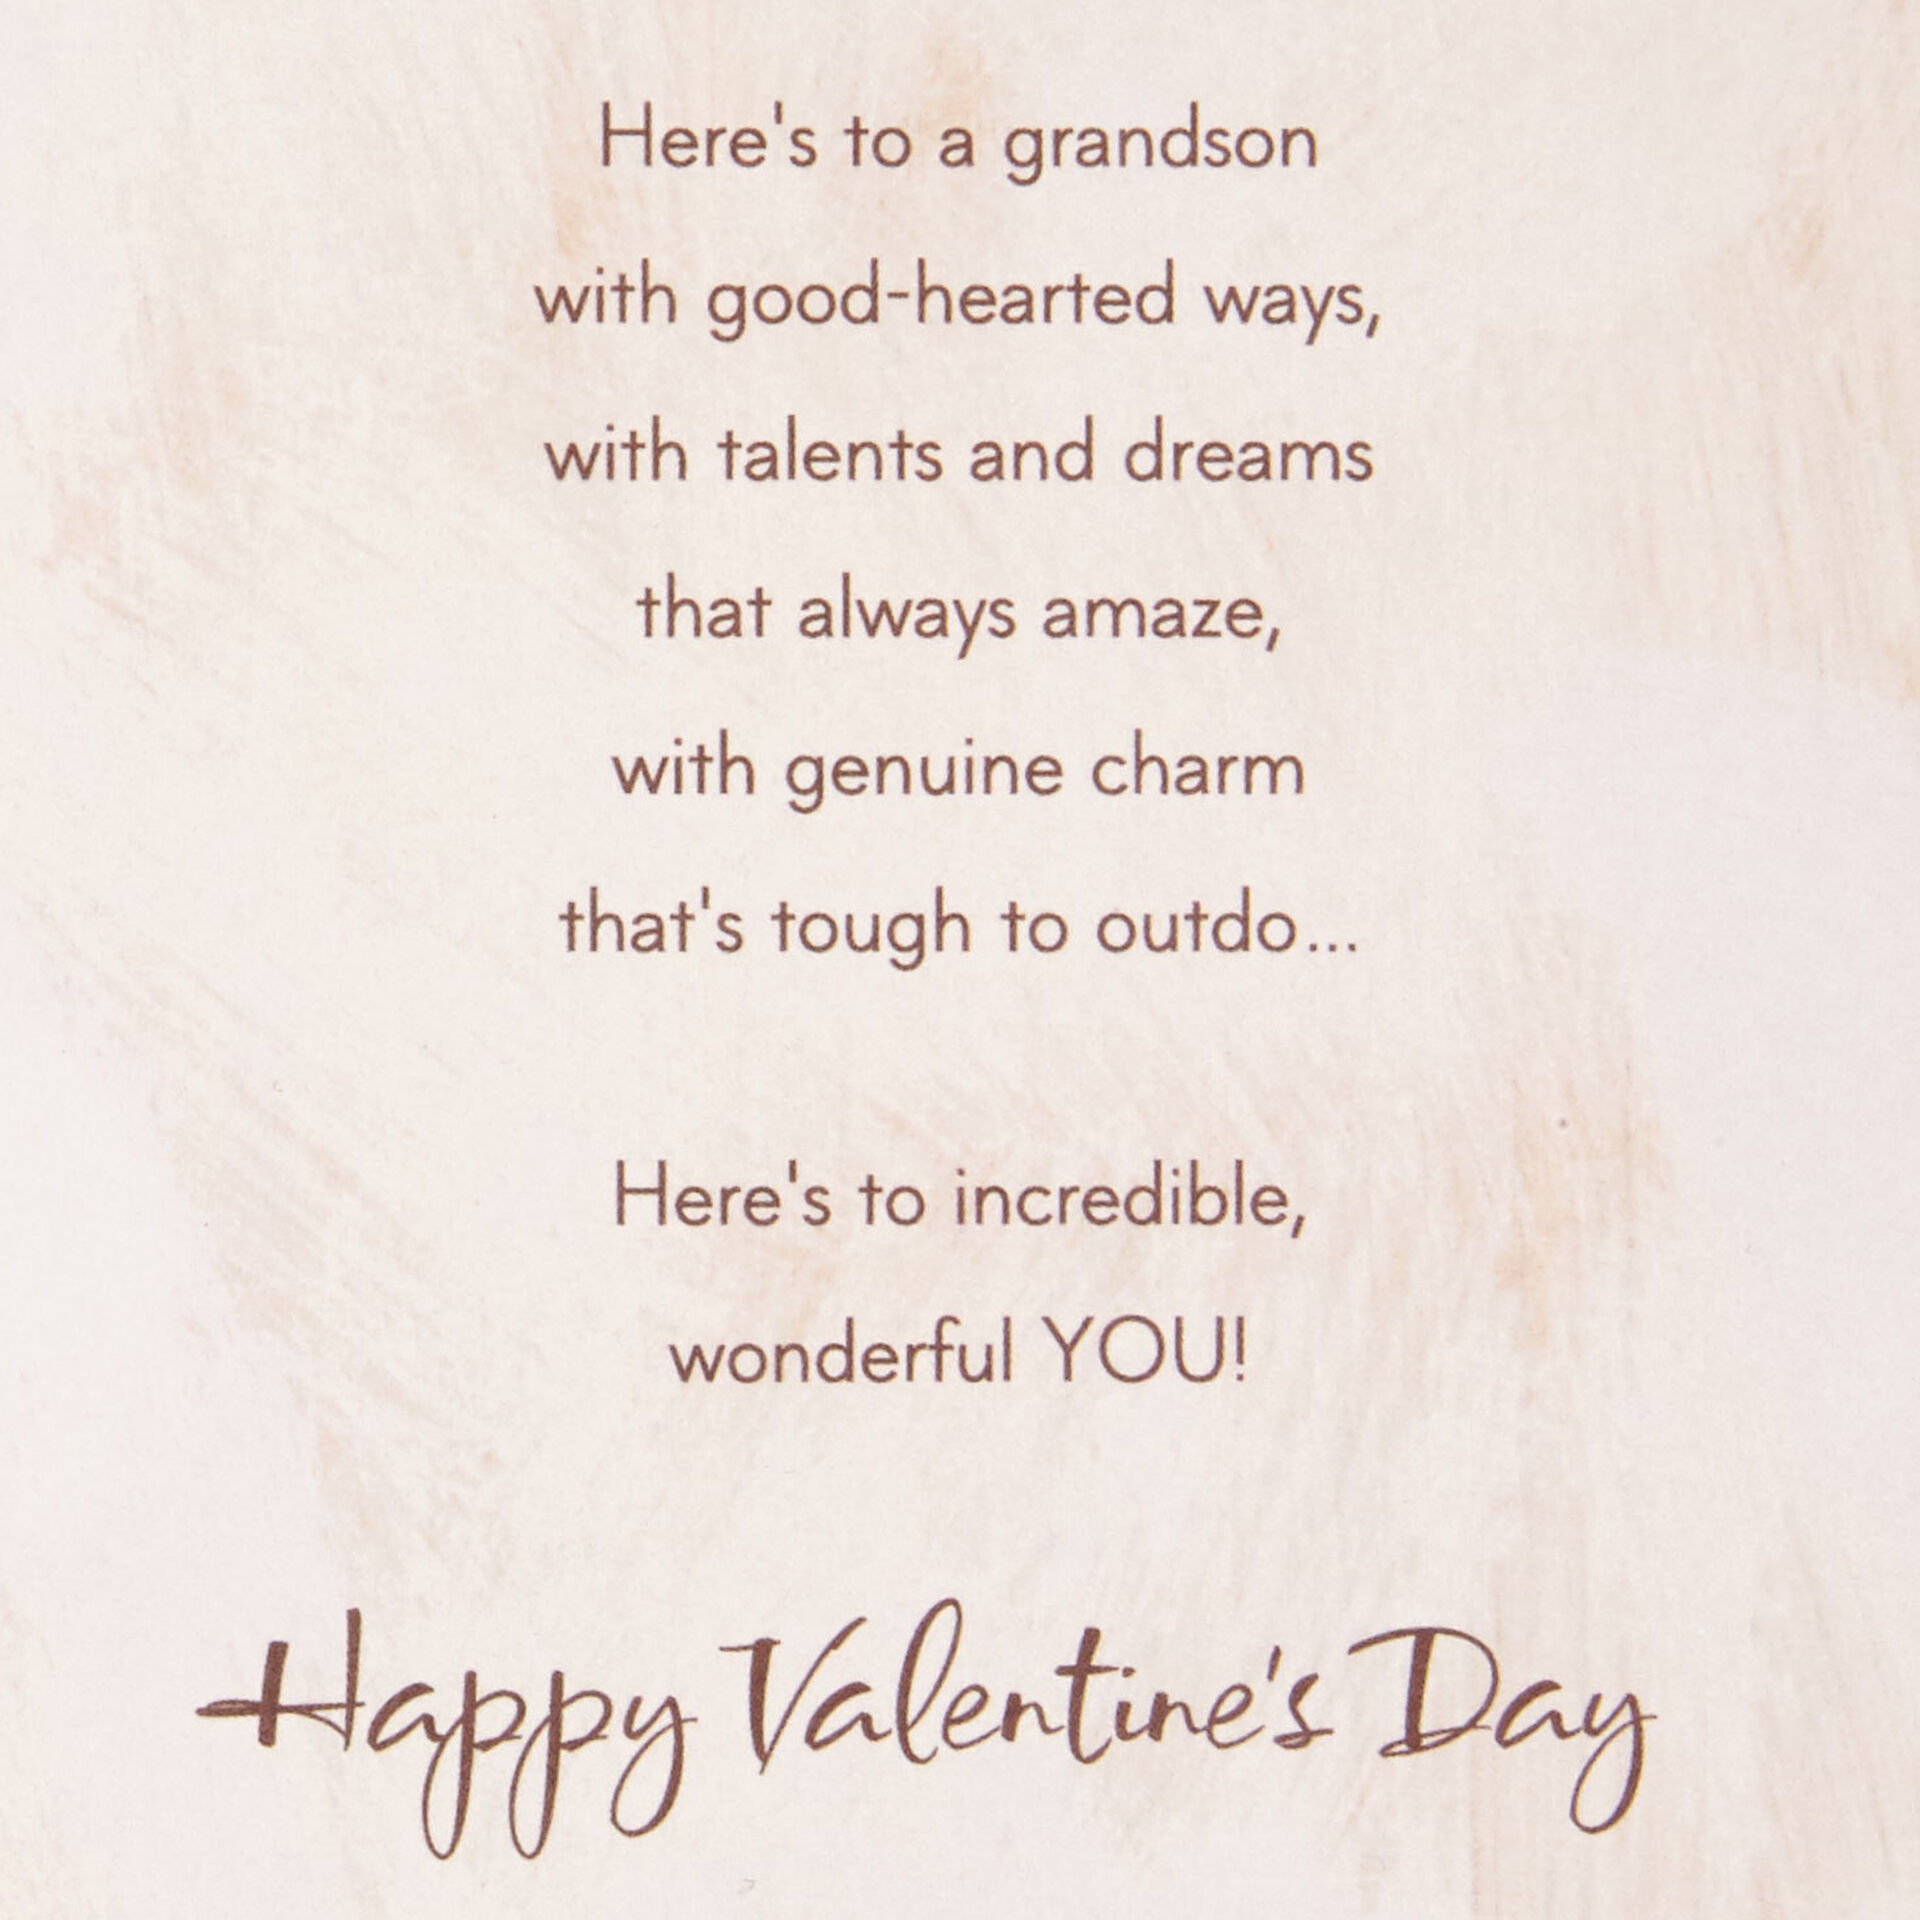 here-s-to-incredible-you-valentine-s-day-card-for-grandson-greeting